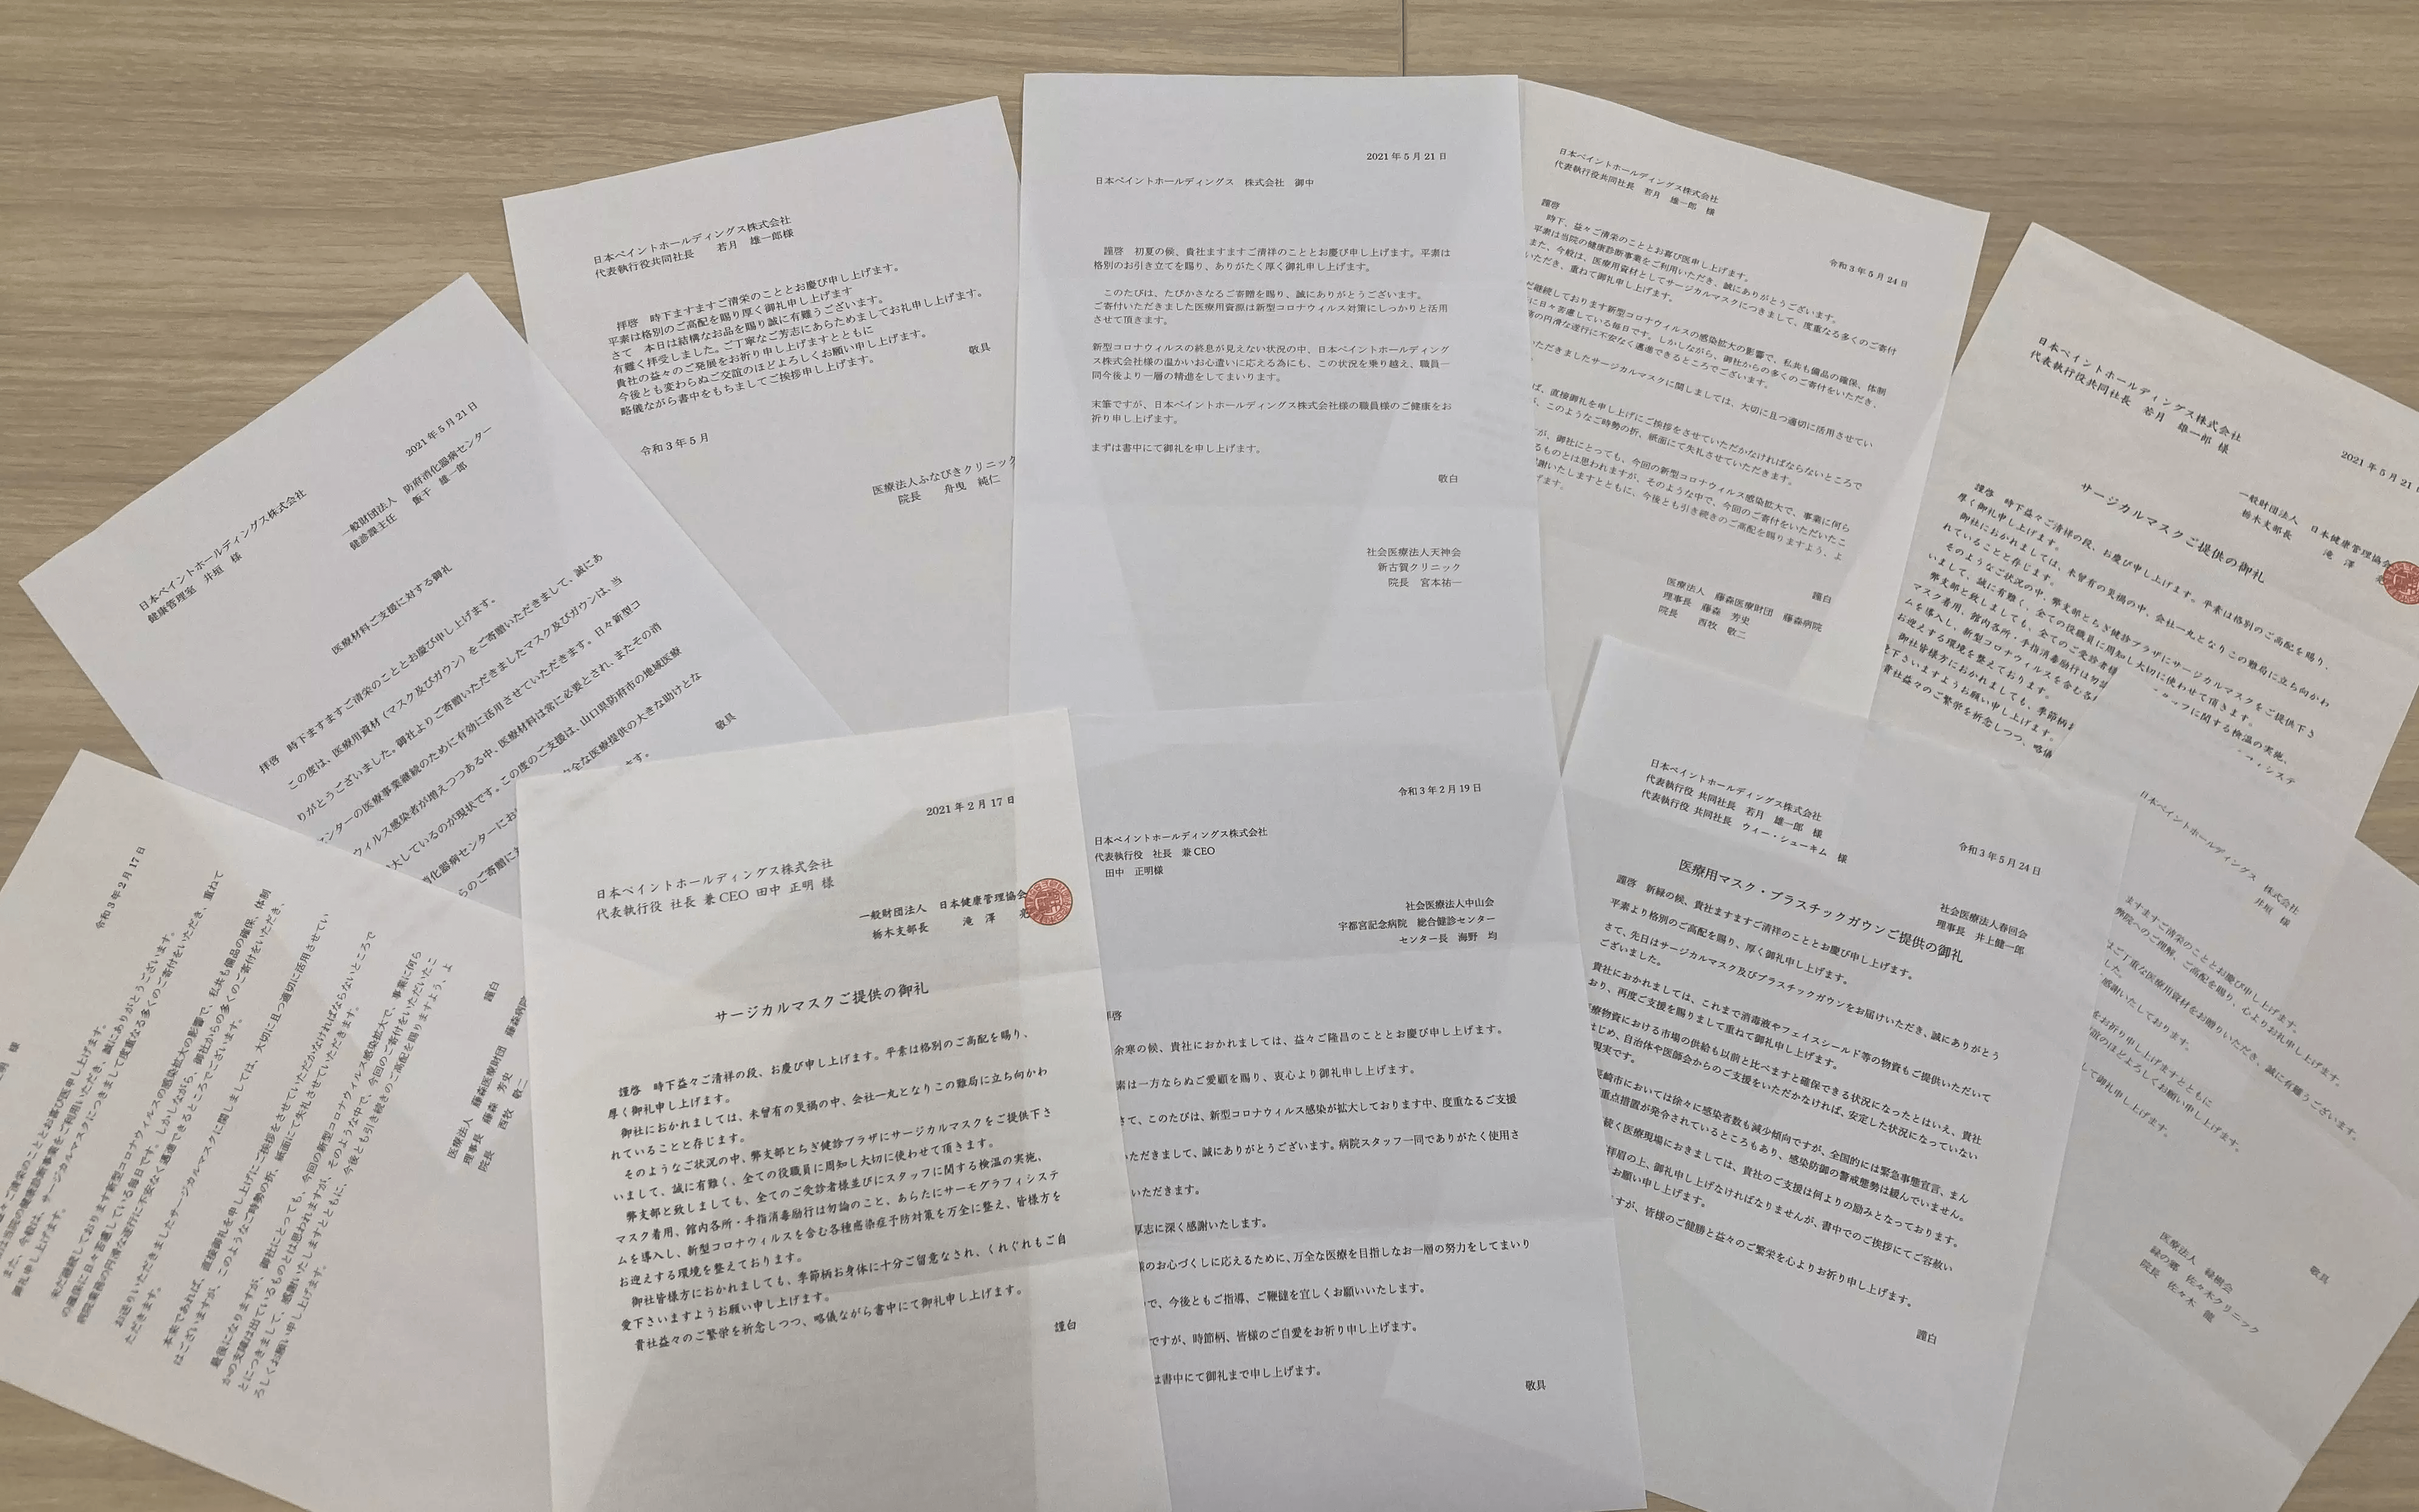 Thank you letters received from recipients